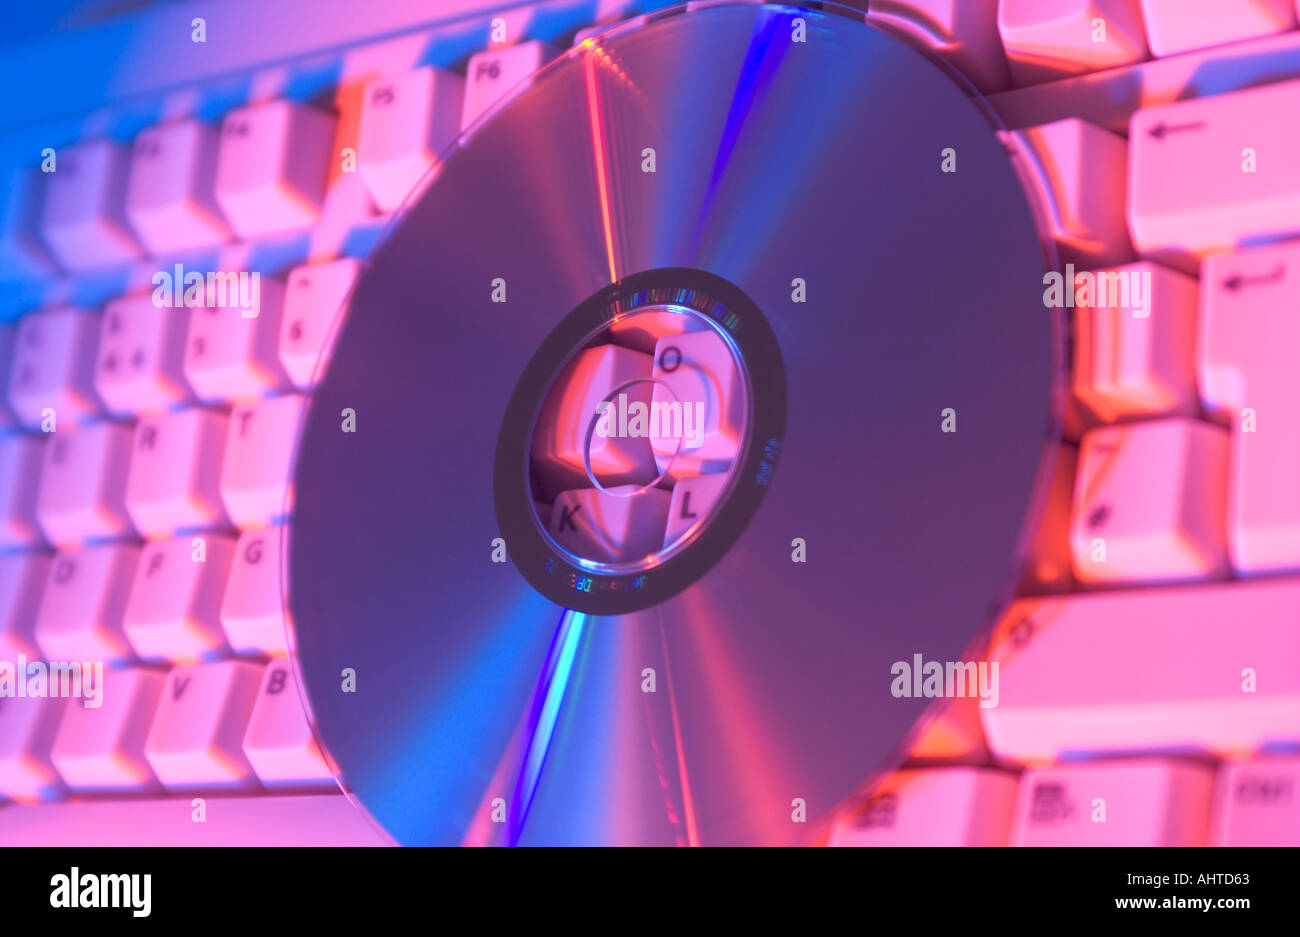 cd or dvd on a computer keyboard Stock Photo